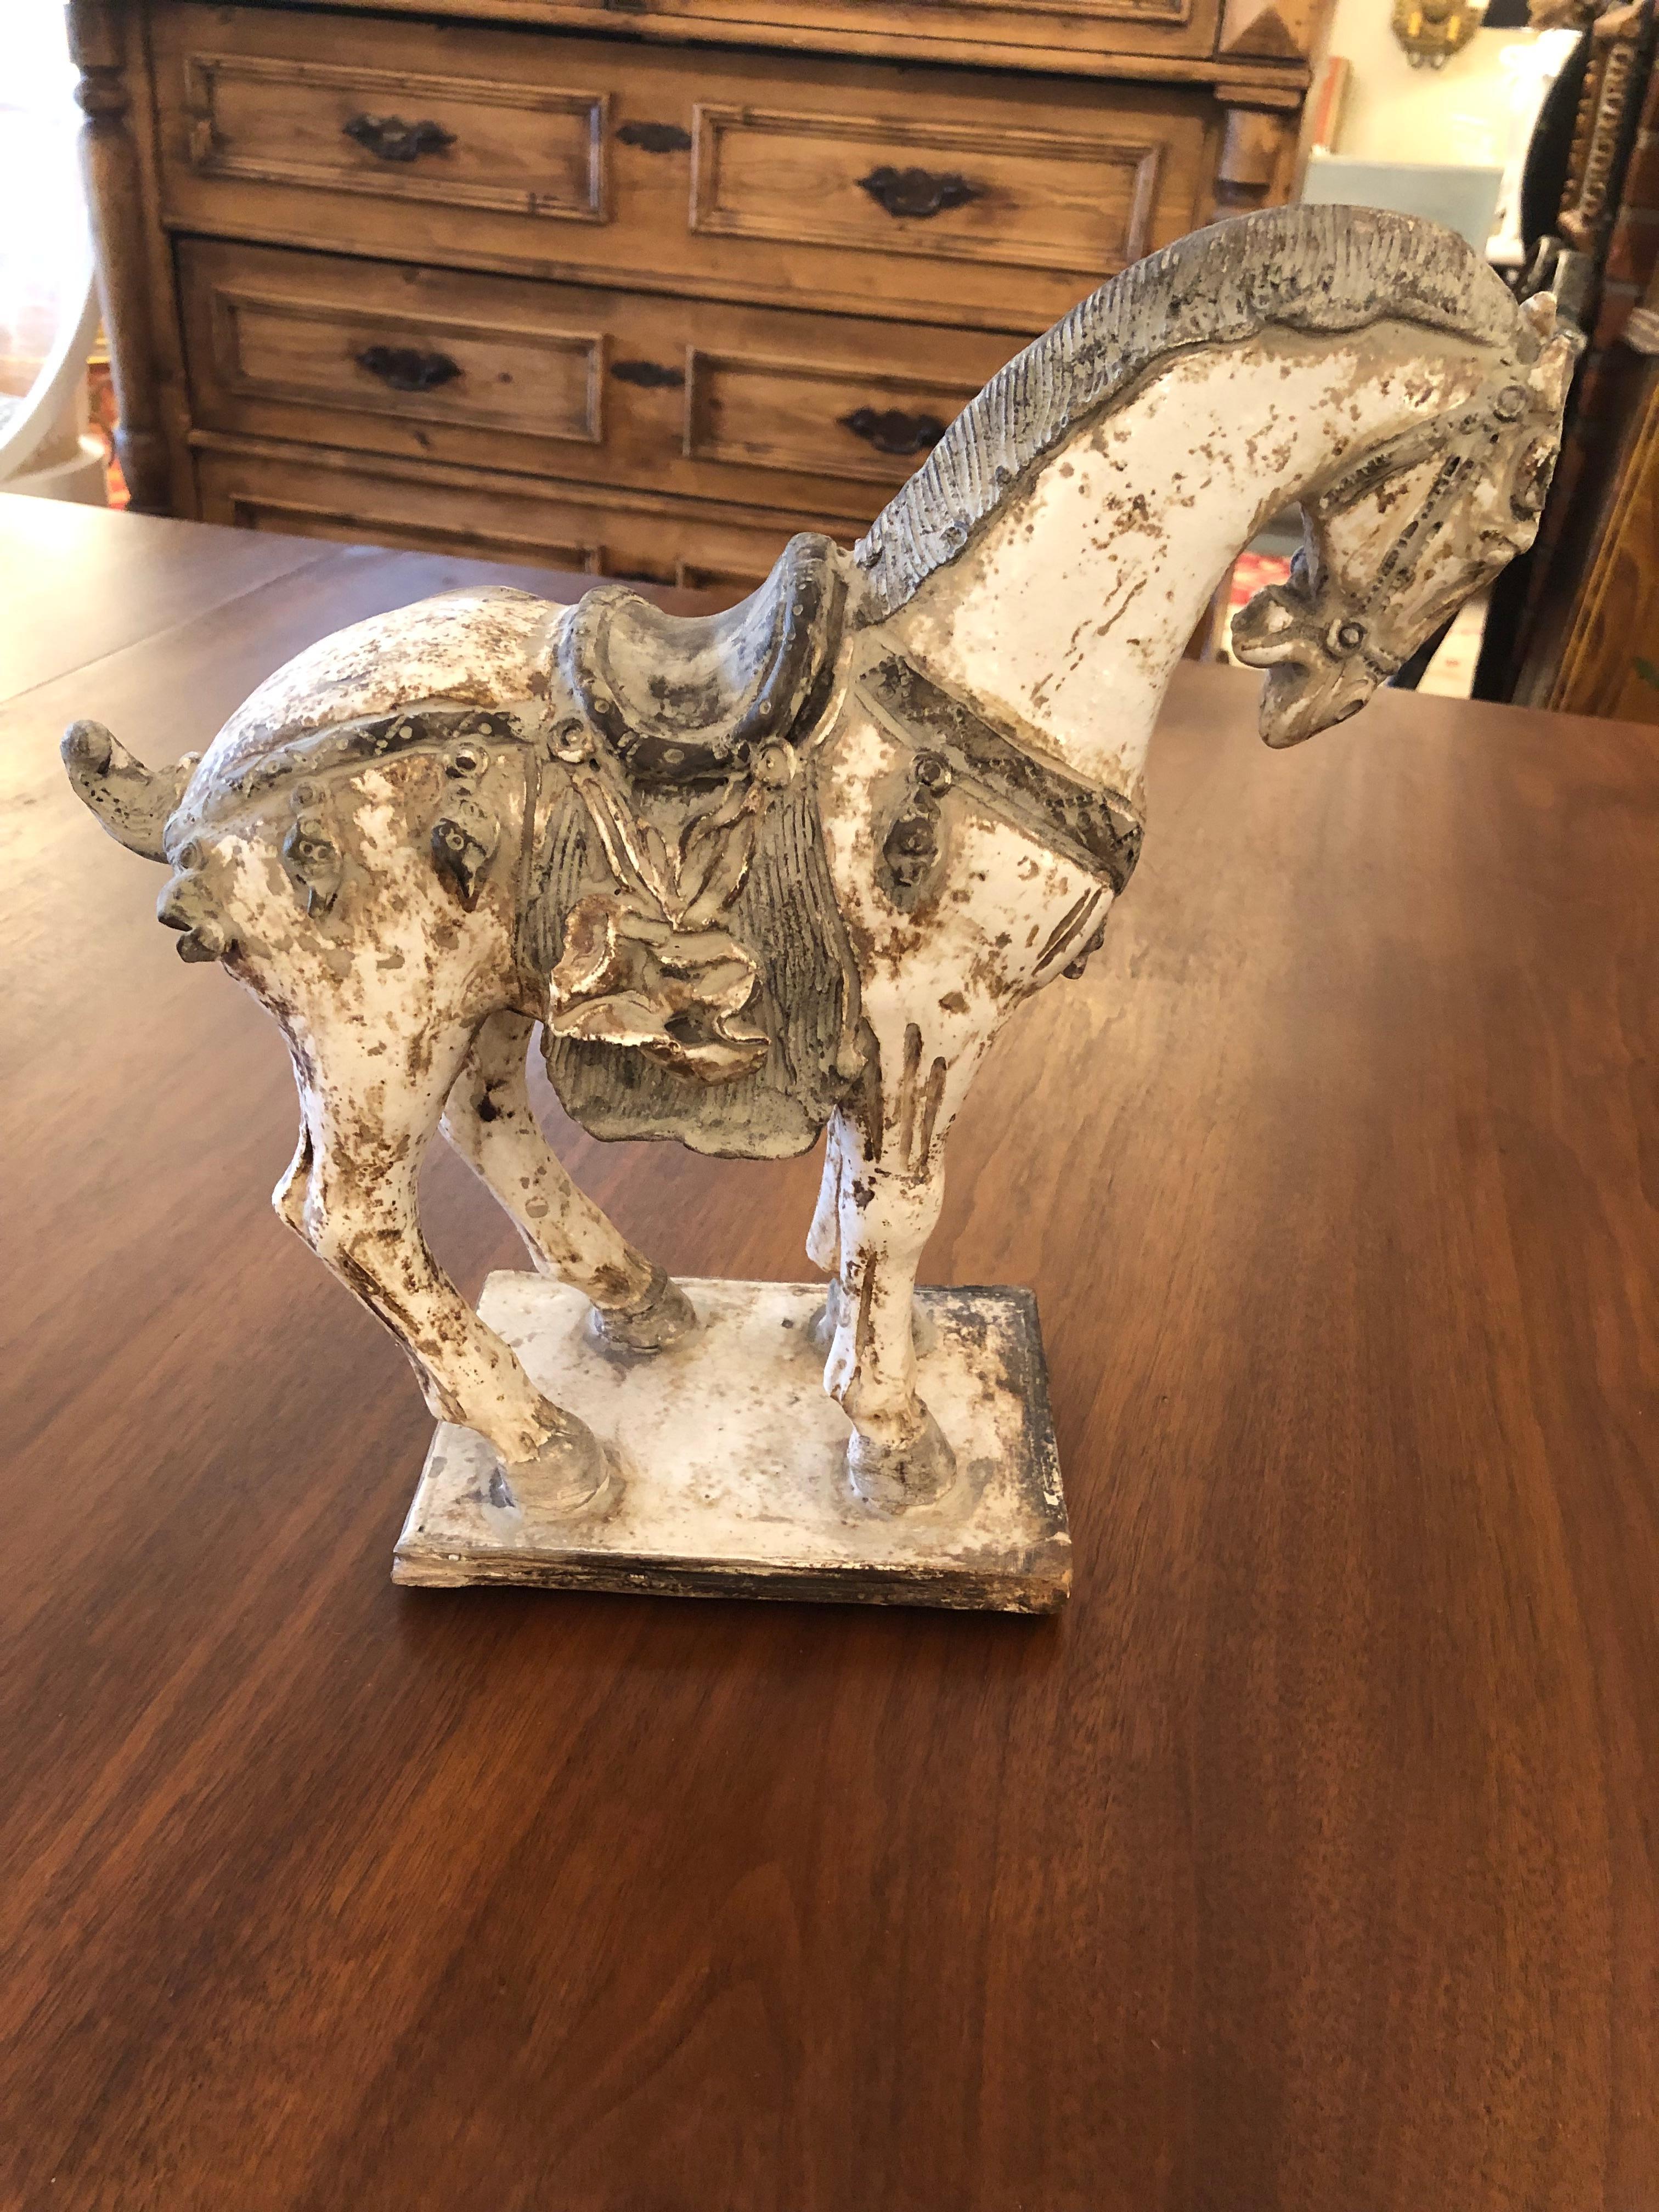 Beautiful Tang Dynasty style ceramic horse sculpture with great detail in cream, brown and black.

Gail.